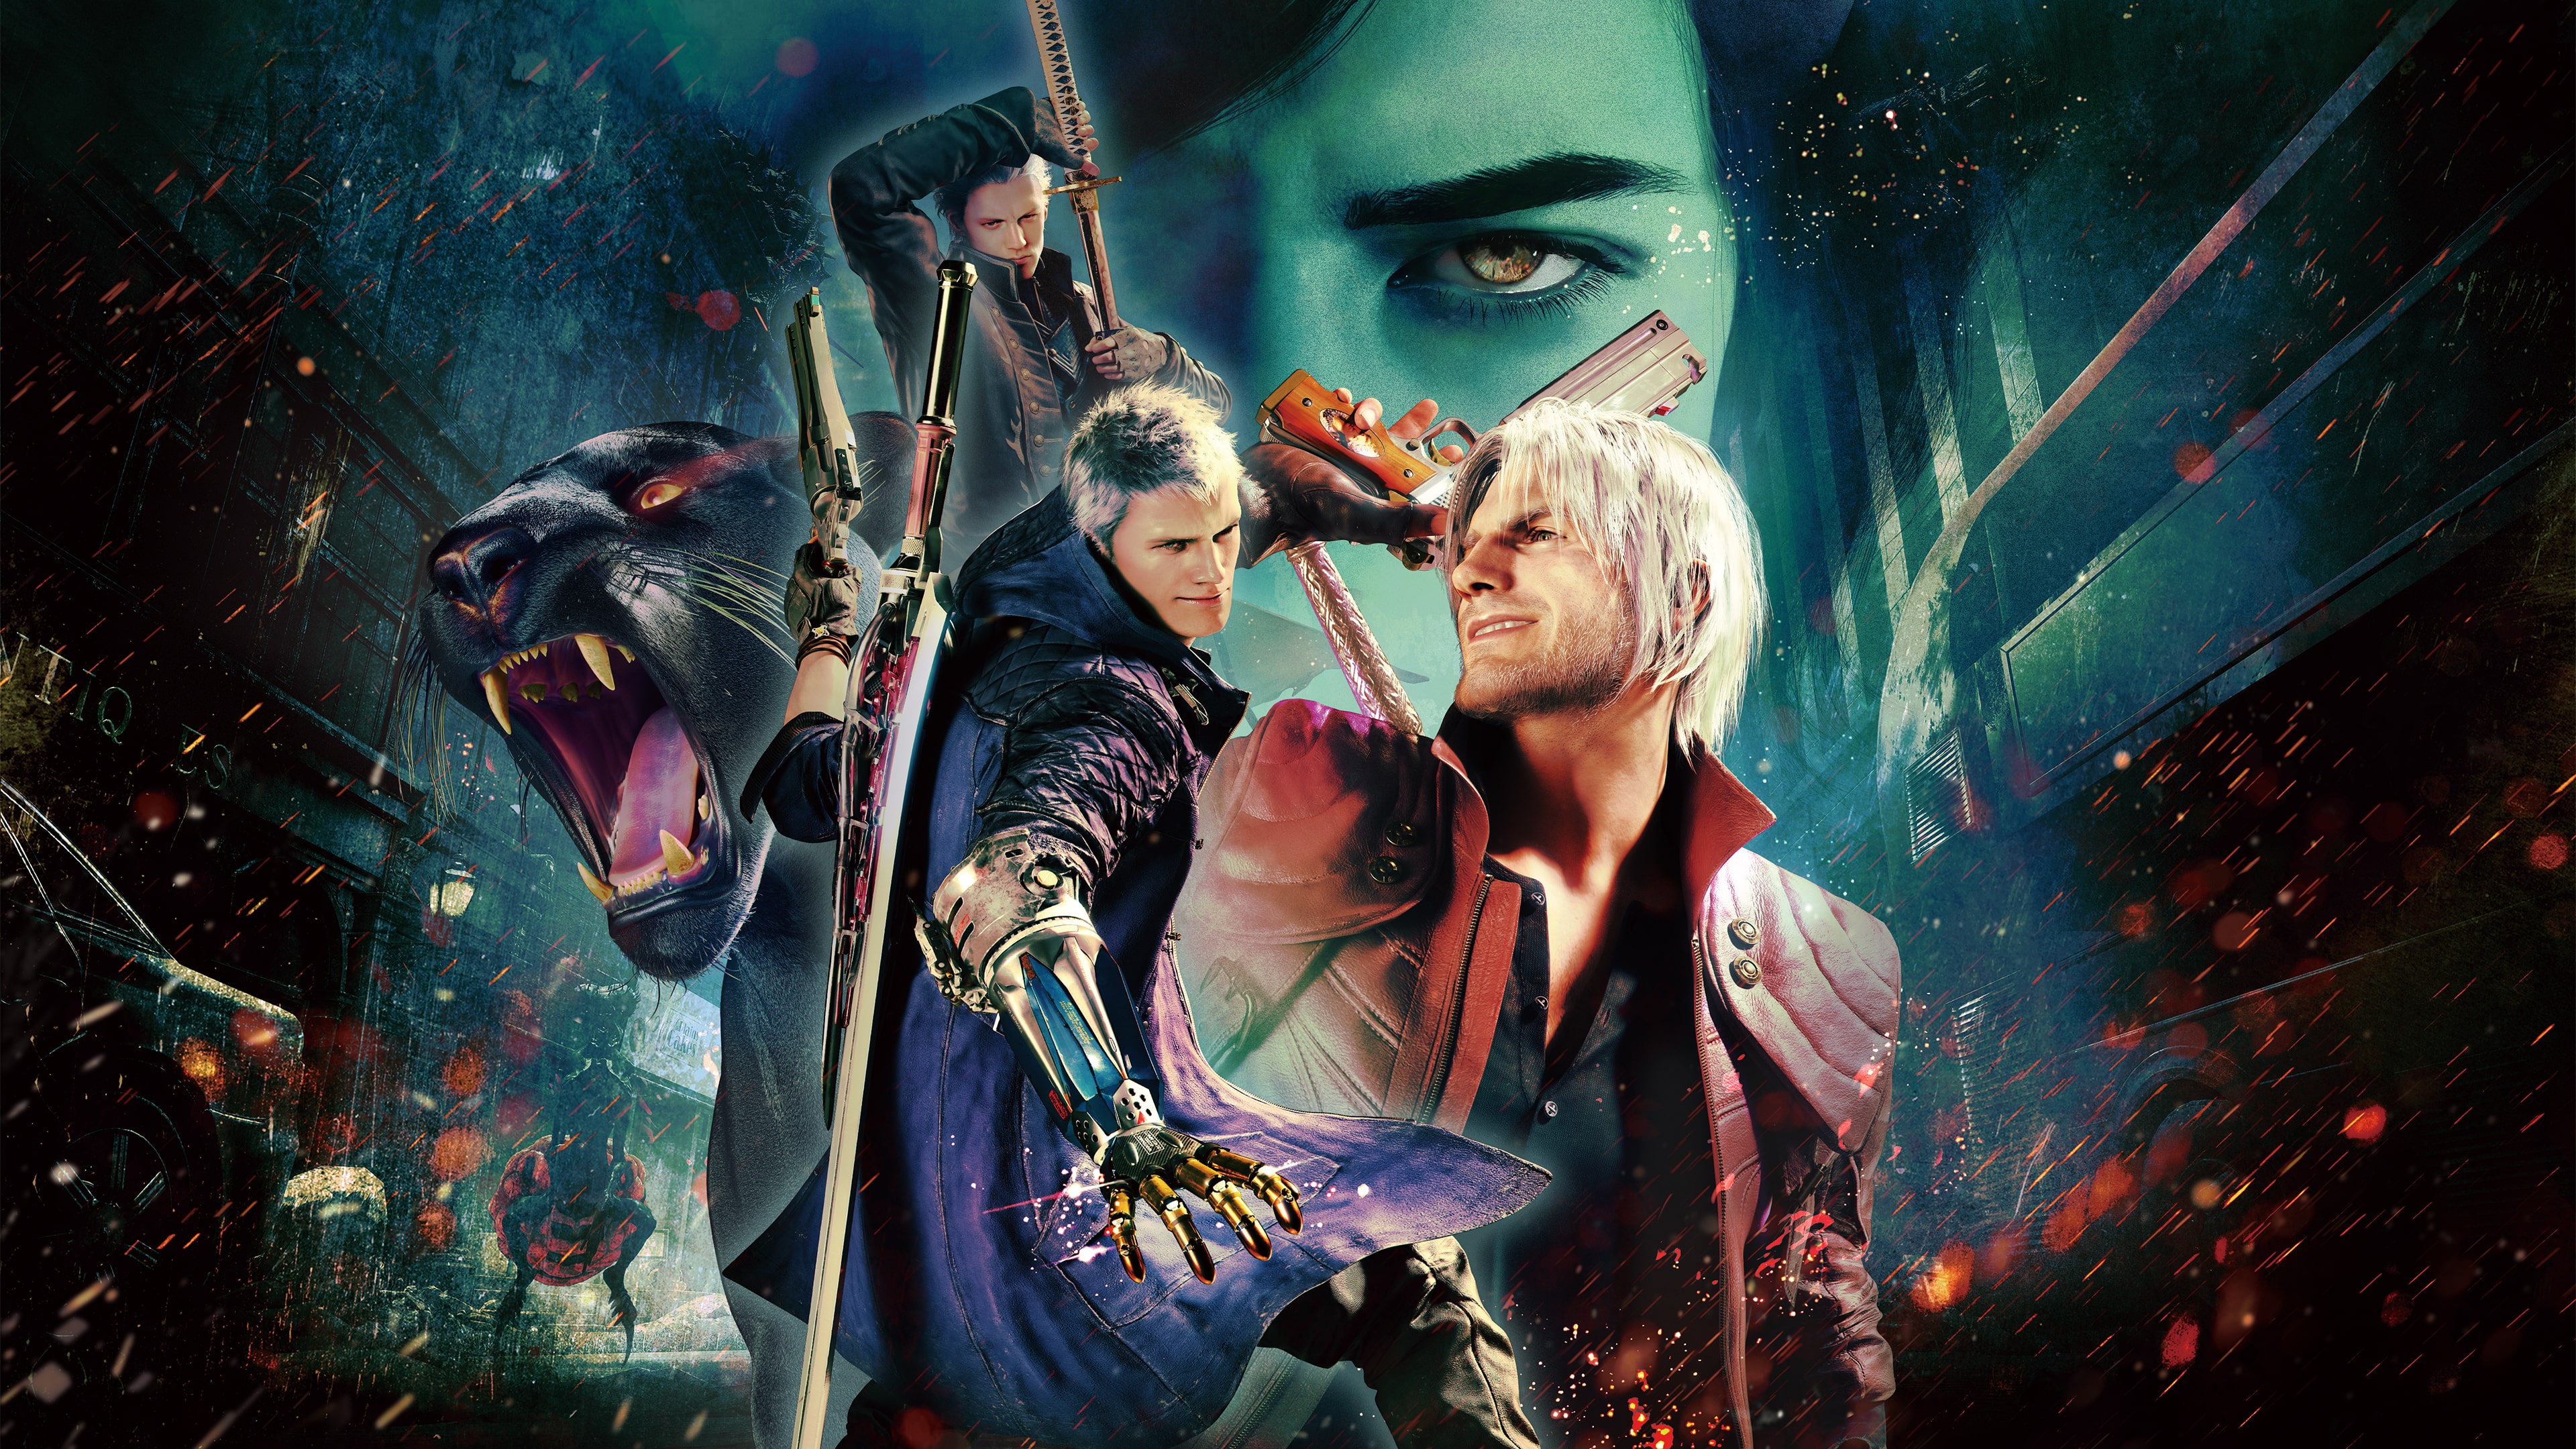 Devil May Cry 5 Special Edition (Game)